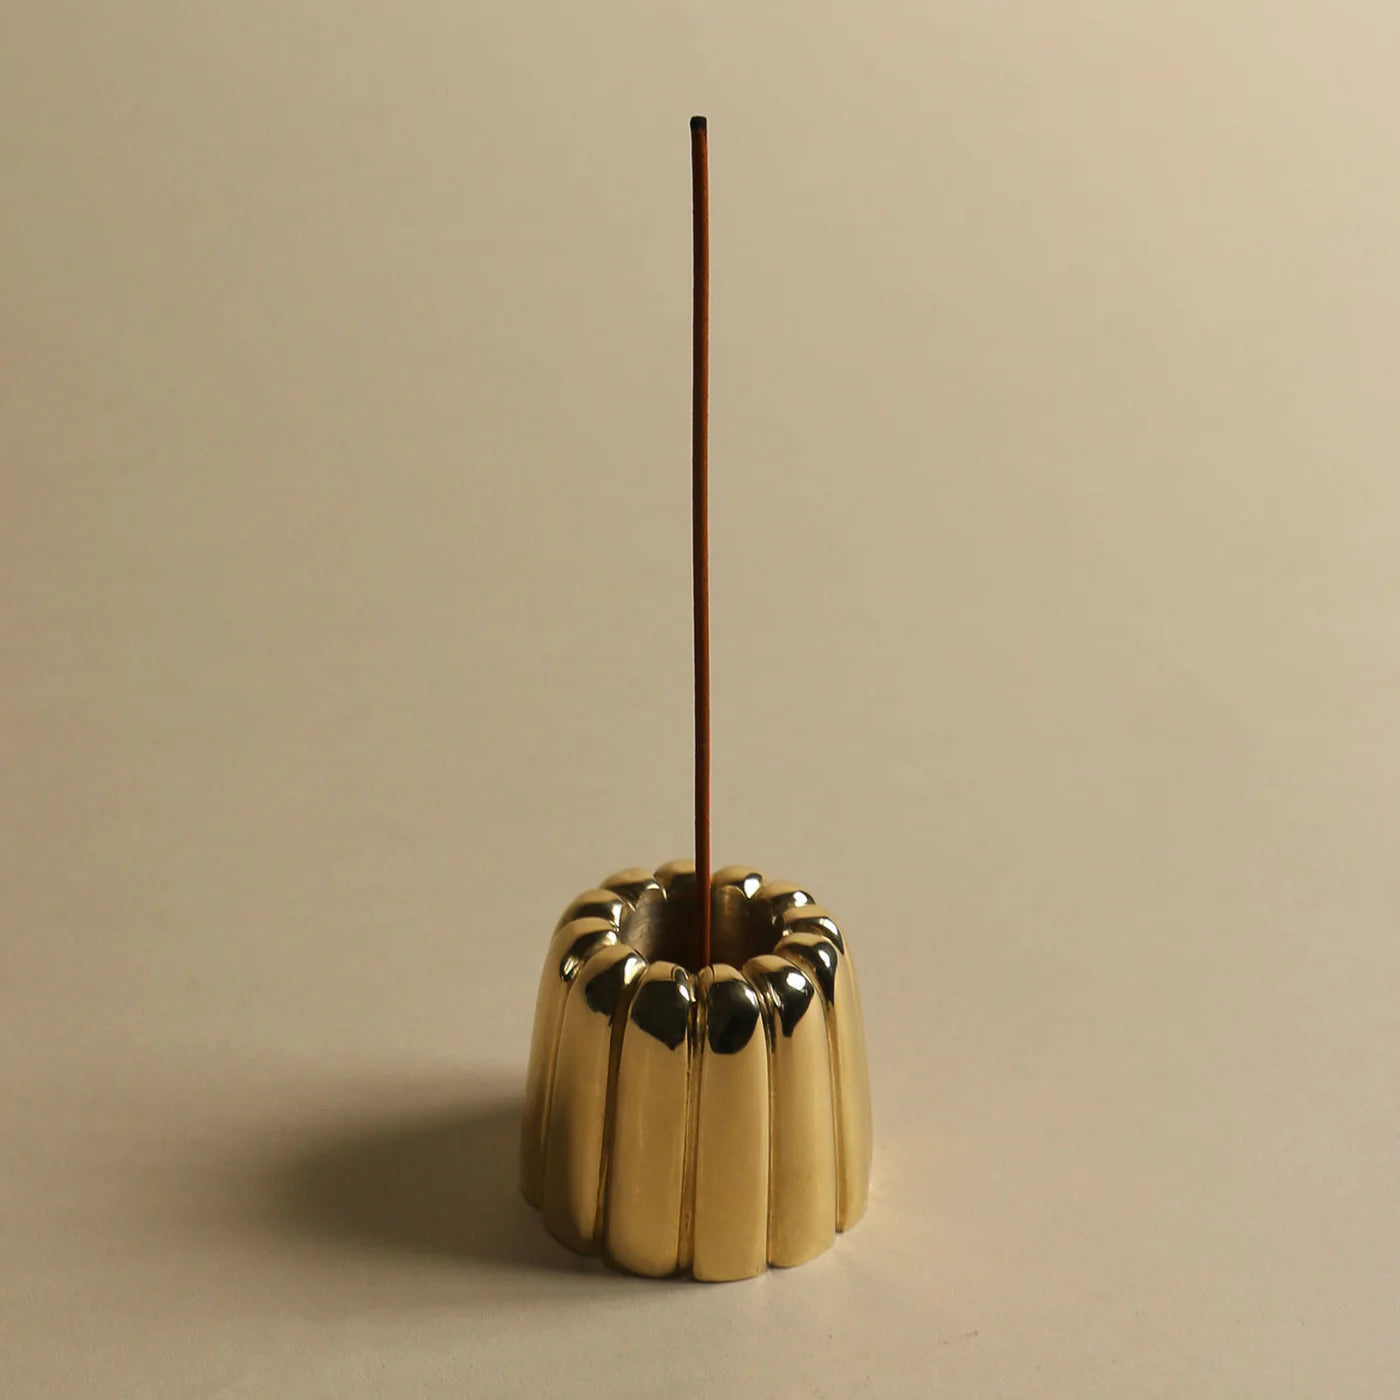 Brass Canelé and Beeswax Candle Set